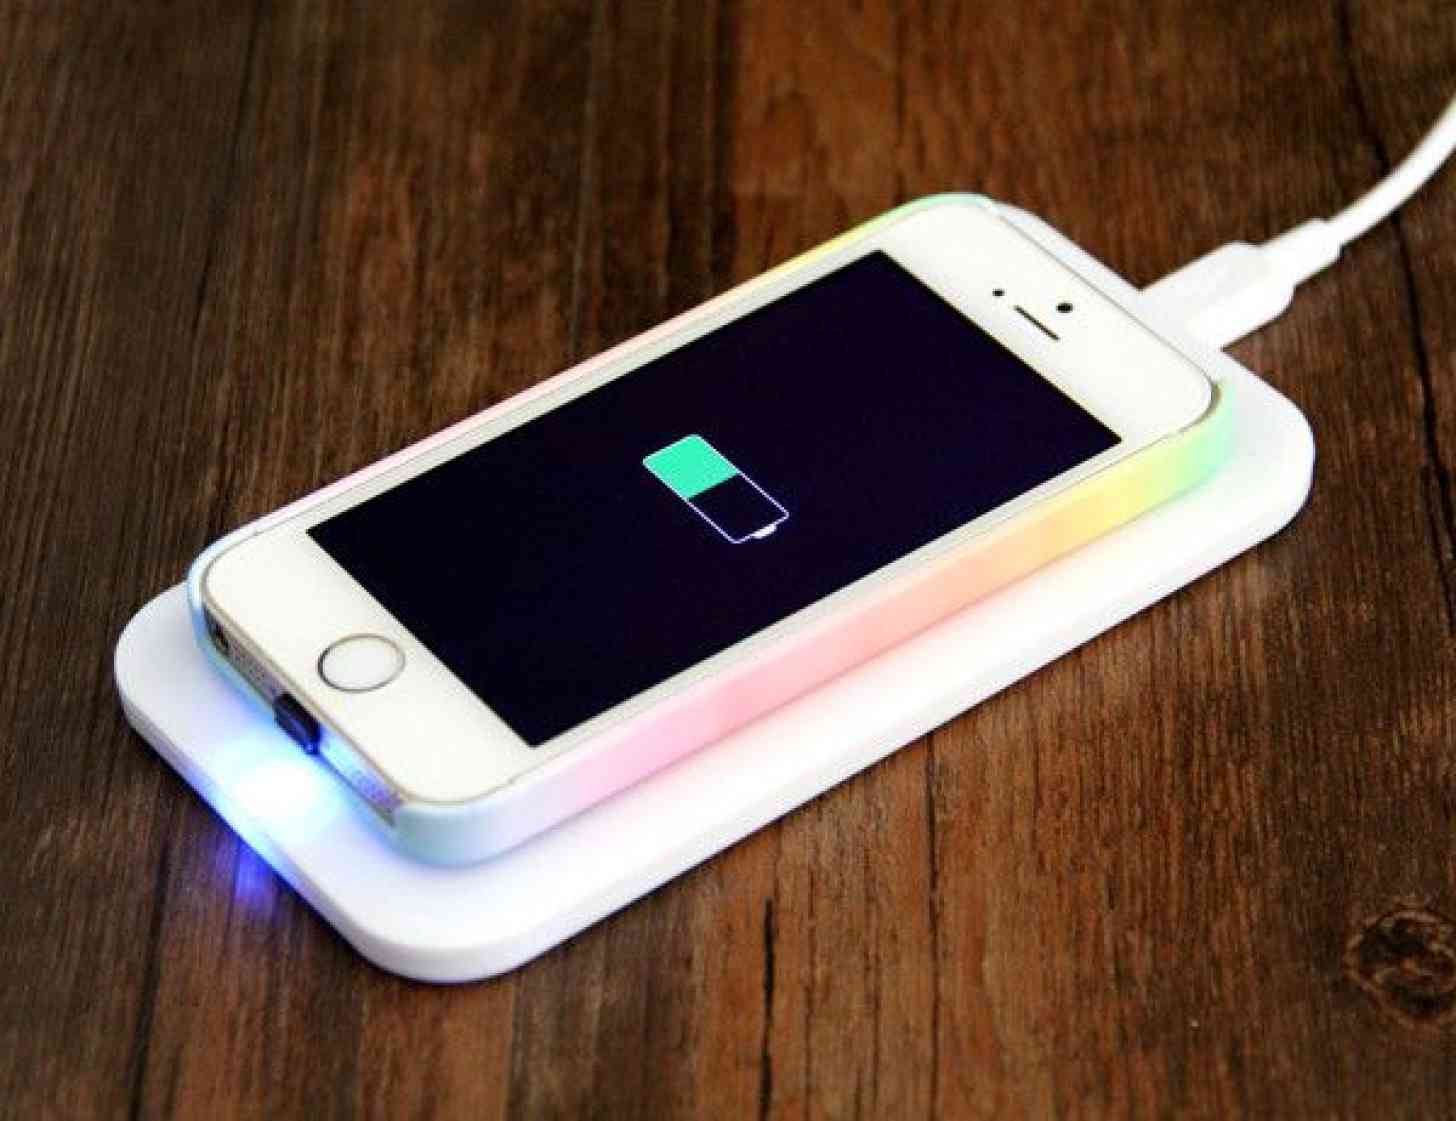 Apple iPhone 5s wireless charge